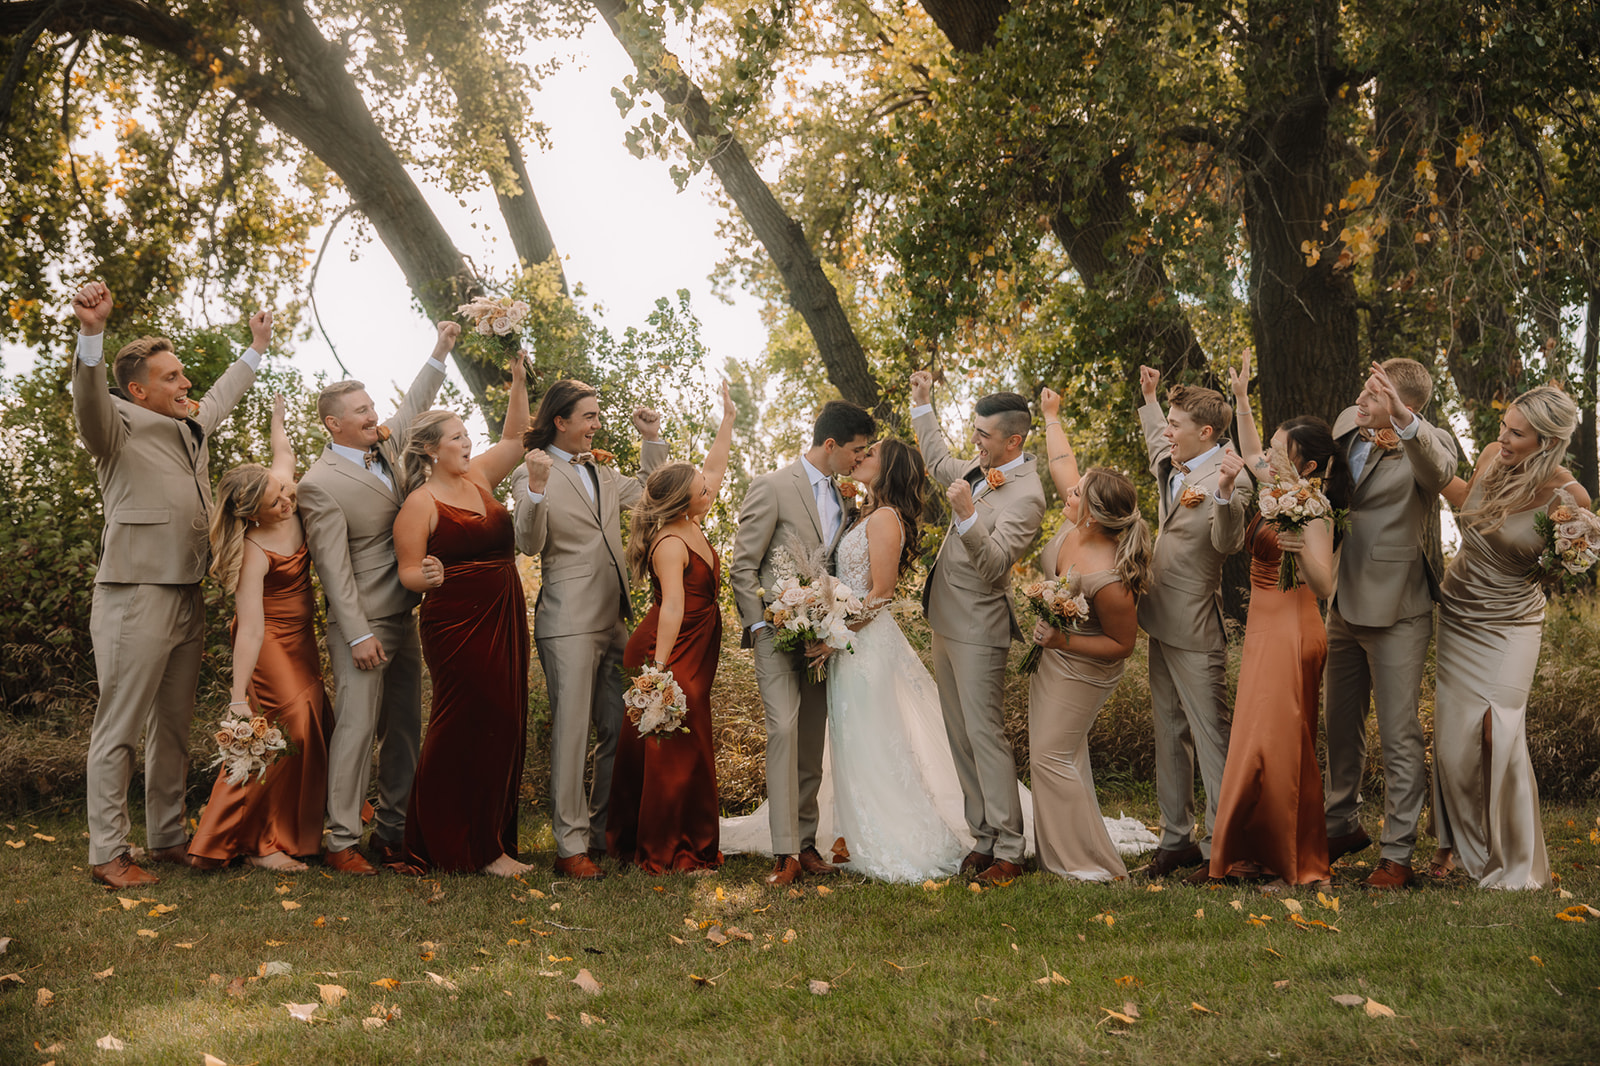 Wedding party photo with fall inspired dress theme at Lone Oak Farm Wedding Venue